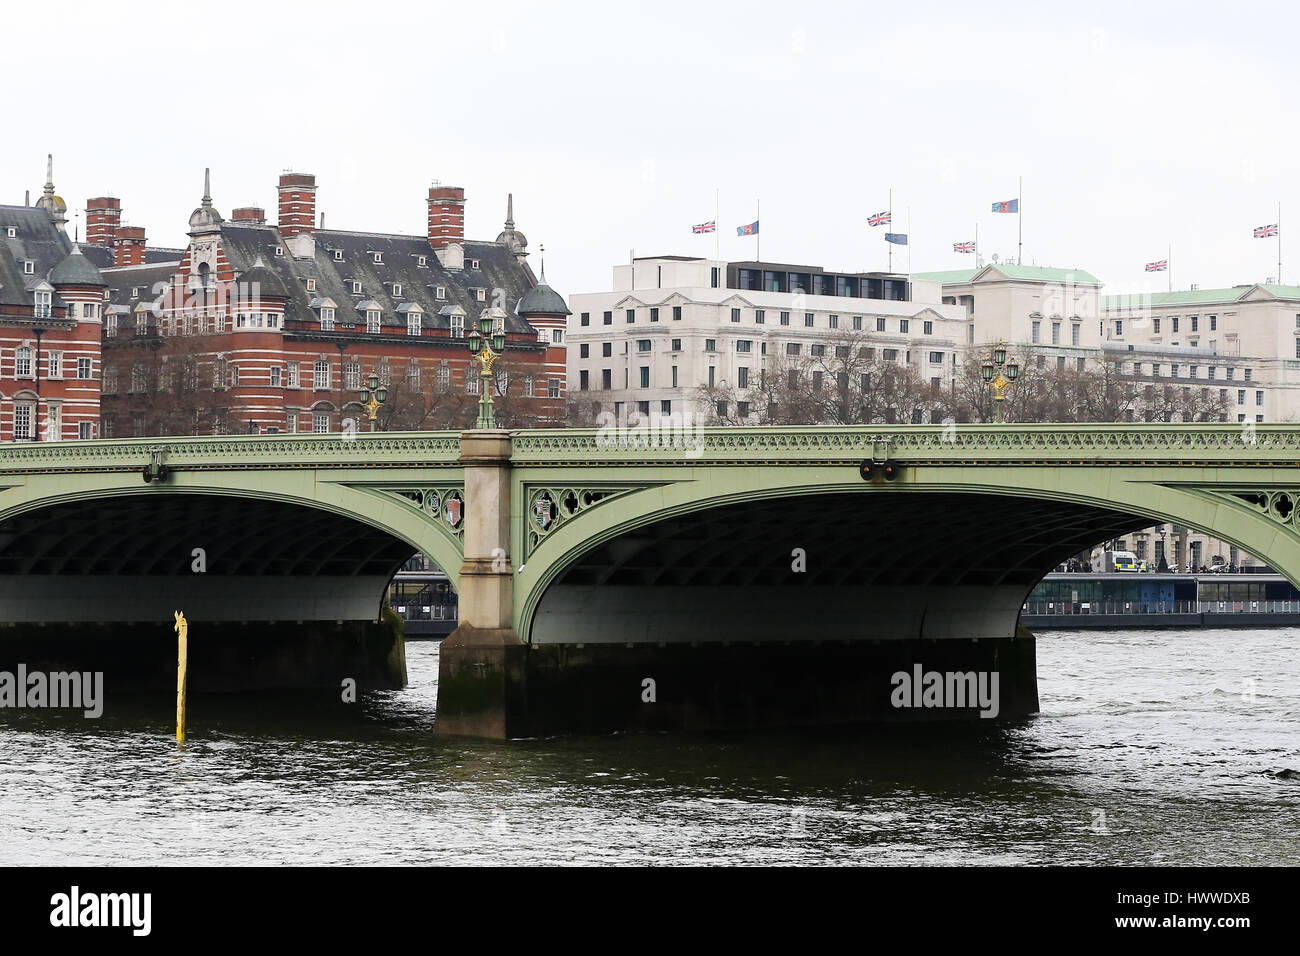 Westminster, London, UK 23 Mar 2017- A general view of Westminster Bridge without any traffice as it remains closed following the terrorist attack in Westminster, London. Scotland Yard said on 23 March 2017 that police have made seven arrests in raids carried out over night in Birmingham London and elsewhere in the country after the terror attack in the Westminister Palace grounds and on Westminster Bridge on 22 March 2017 leaving four people dead, including the attacker, and 29 people injured. Credit: Dinendra Haria/Alamy Live News Stock Photo